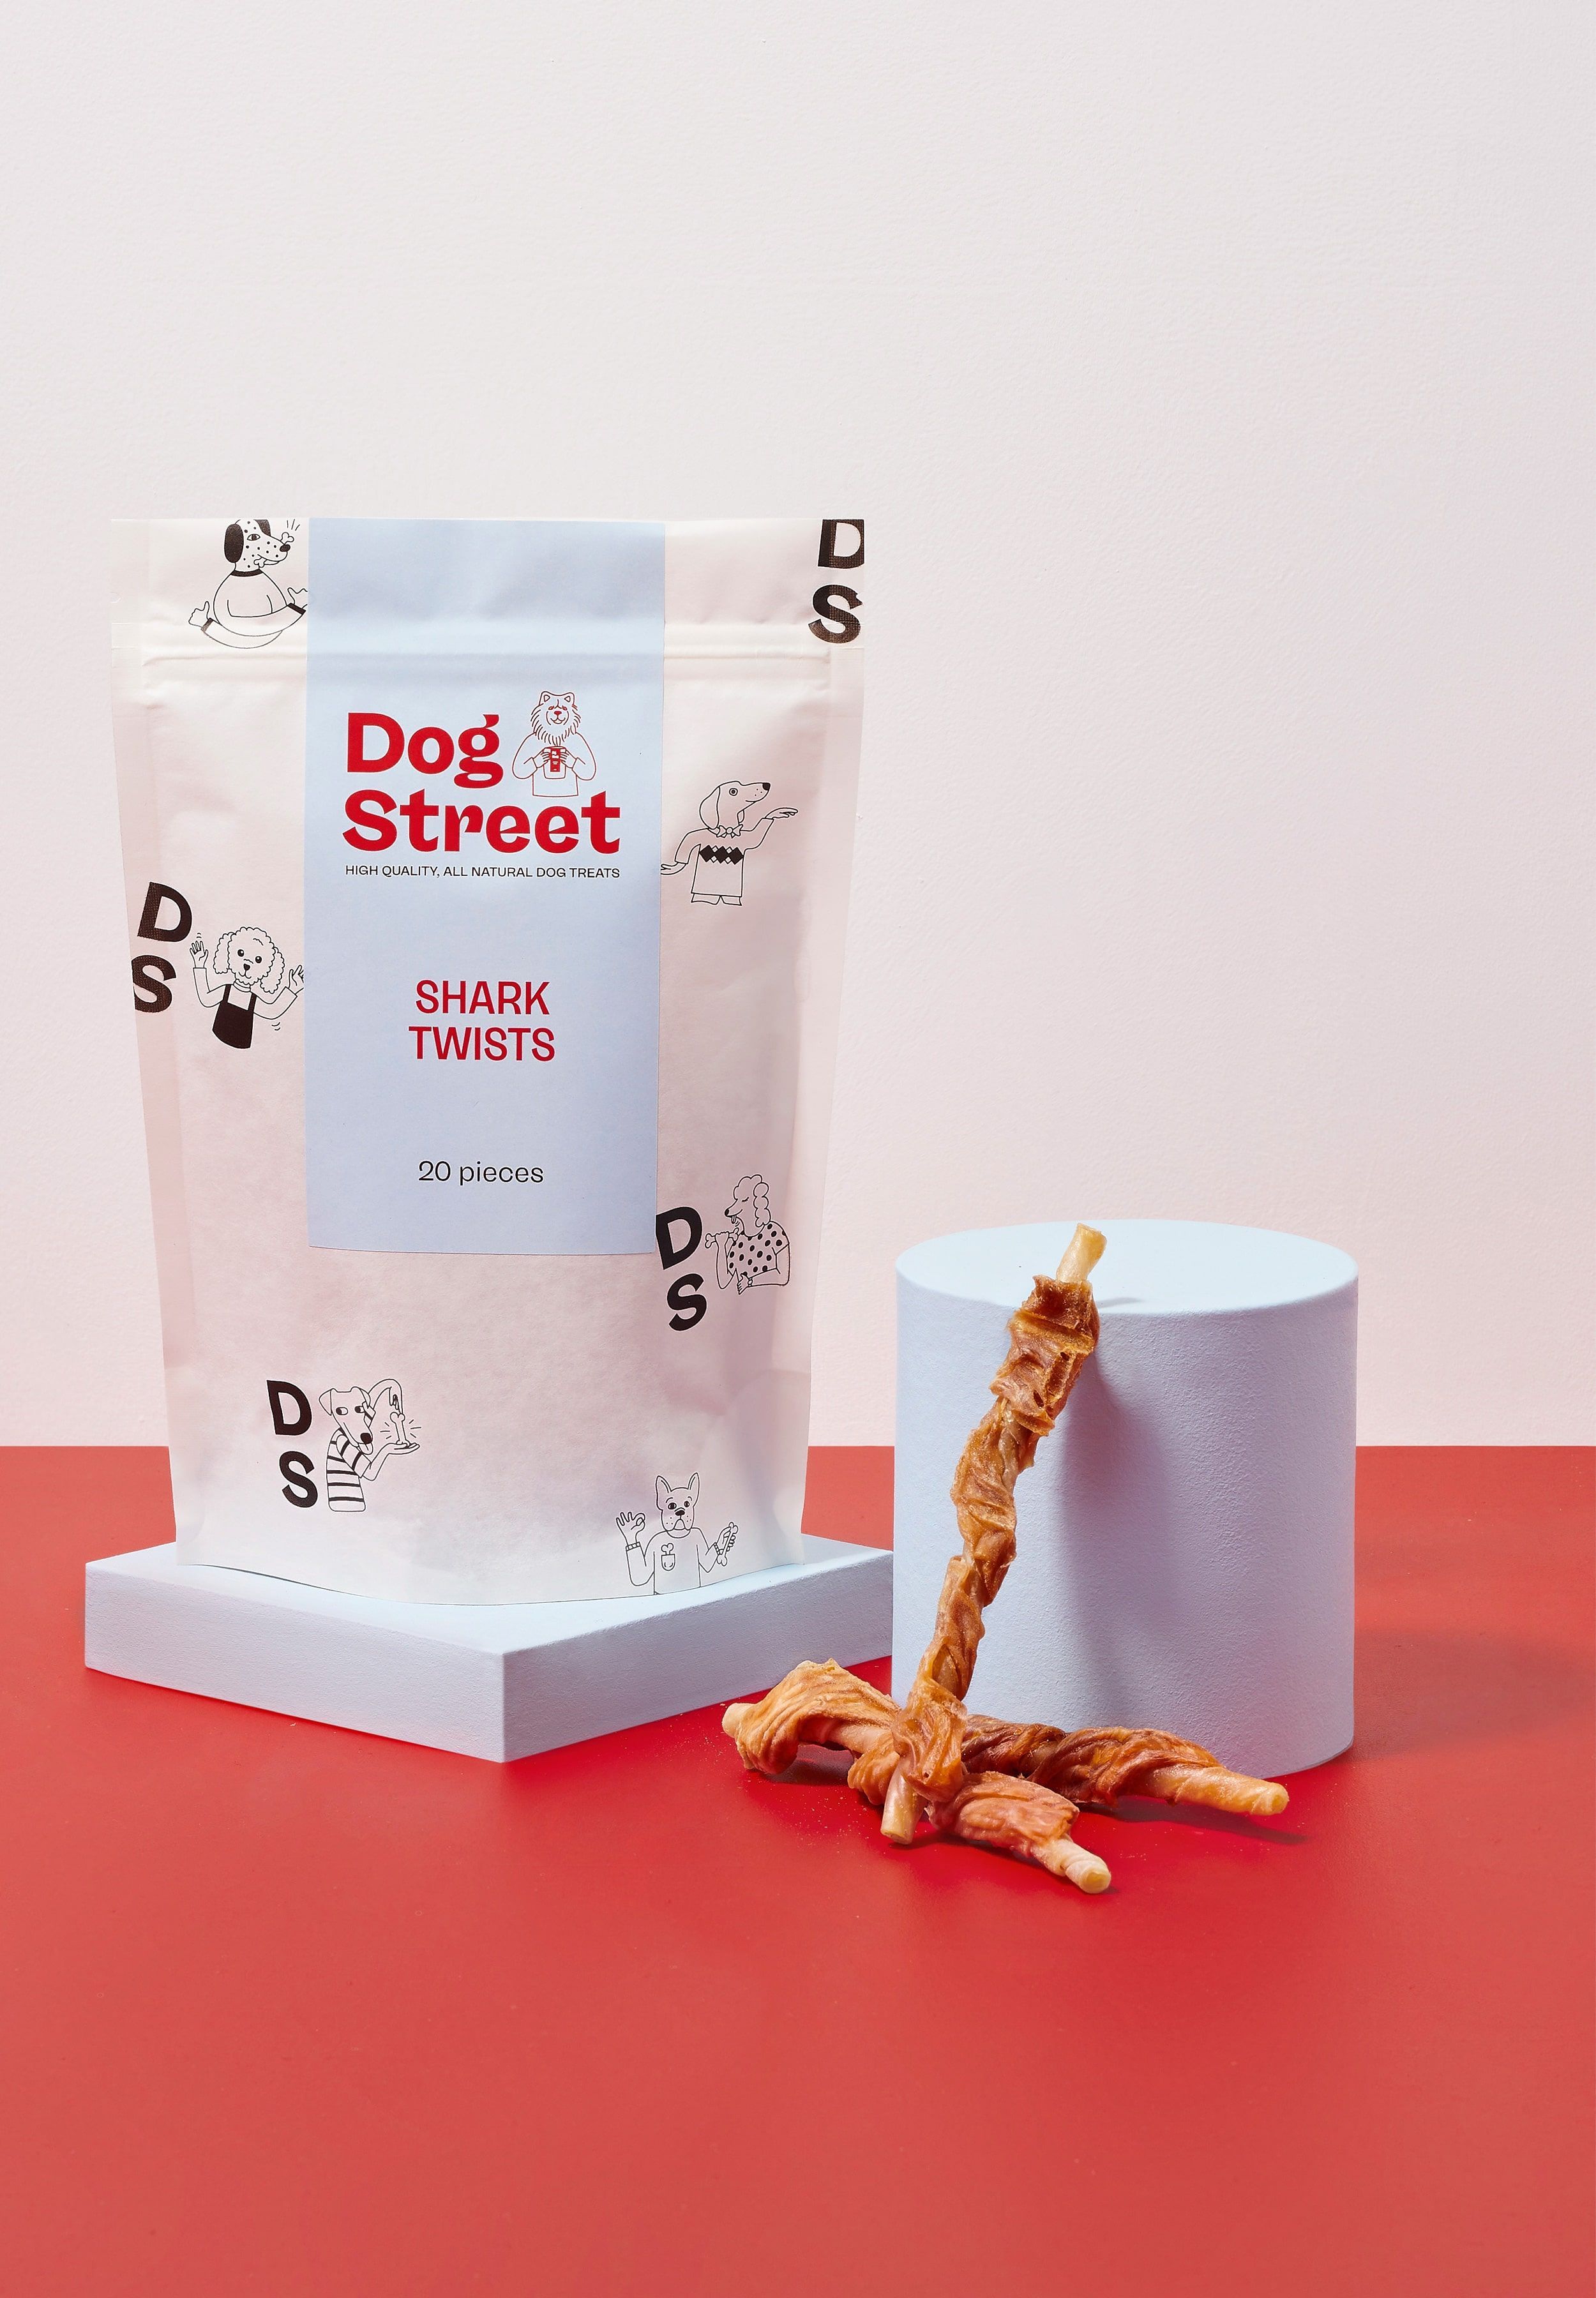 Styled shot of Dog Street Shark Twists pack and treats.